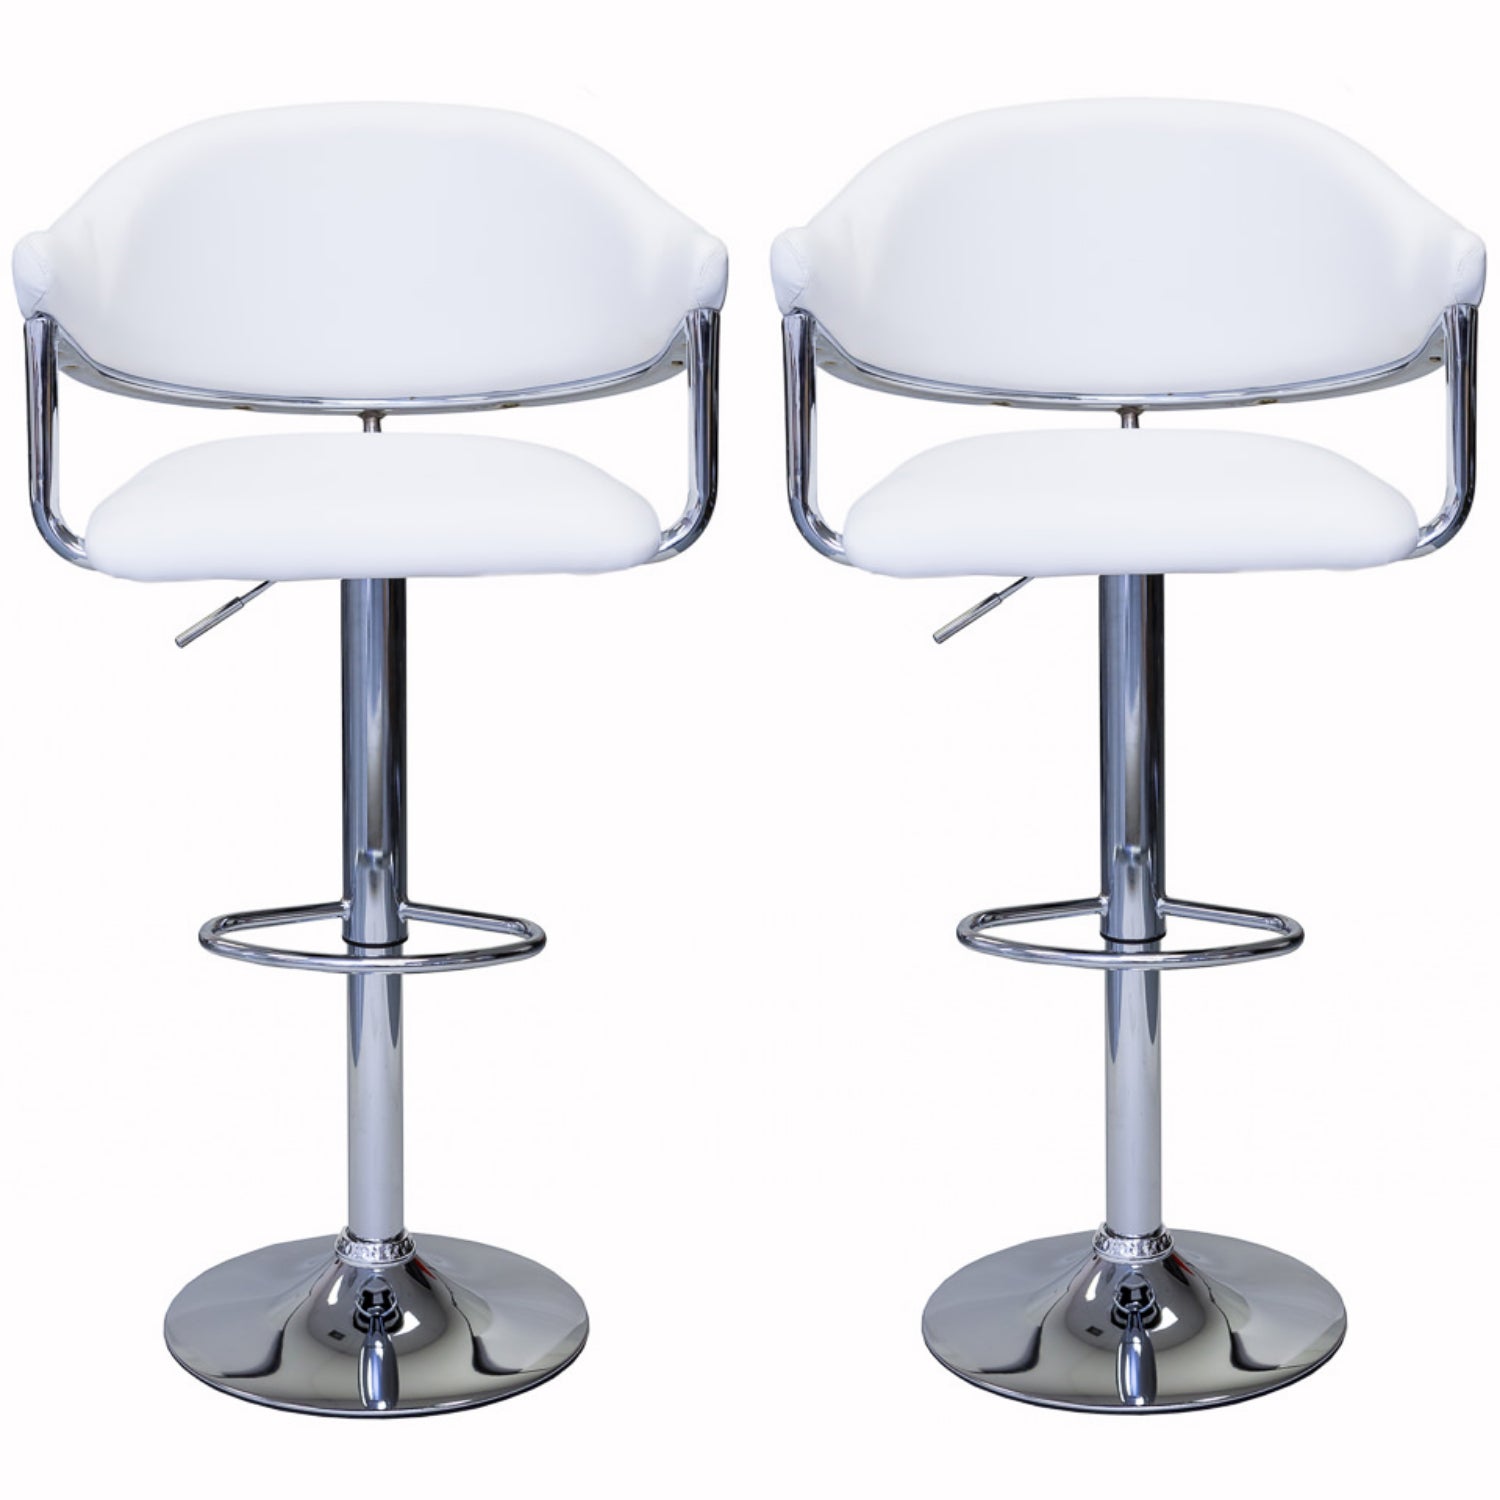 Leatherette bar stools Faux leather bar stools Modern bar stools Contemporary bar stools Adjustable bar stools Swivel bar stools Kitchen bar stools Counter height bar stools Bar furniture Upholstered bar stools White Bar Stools